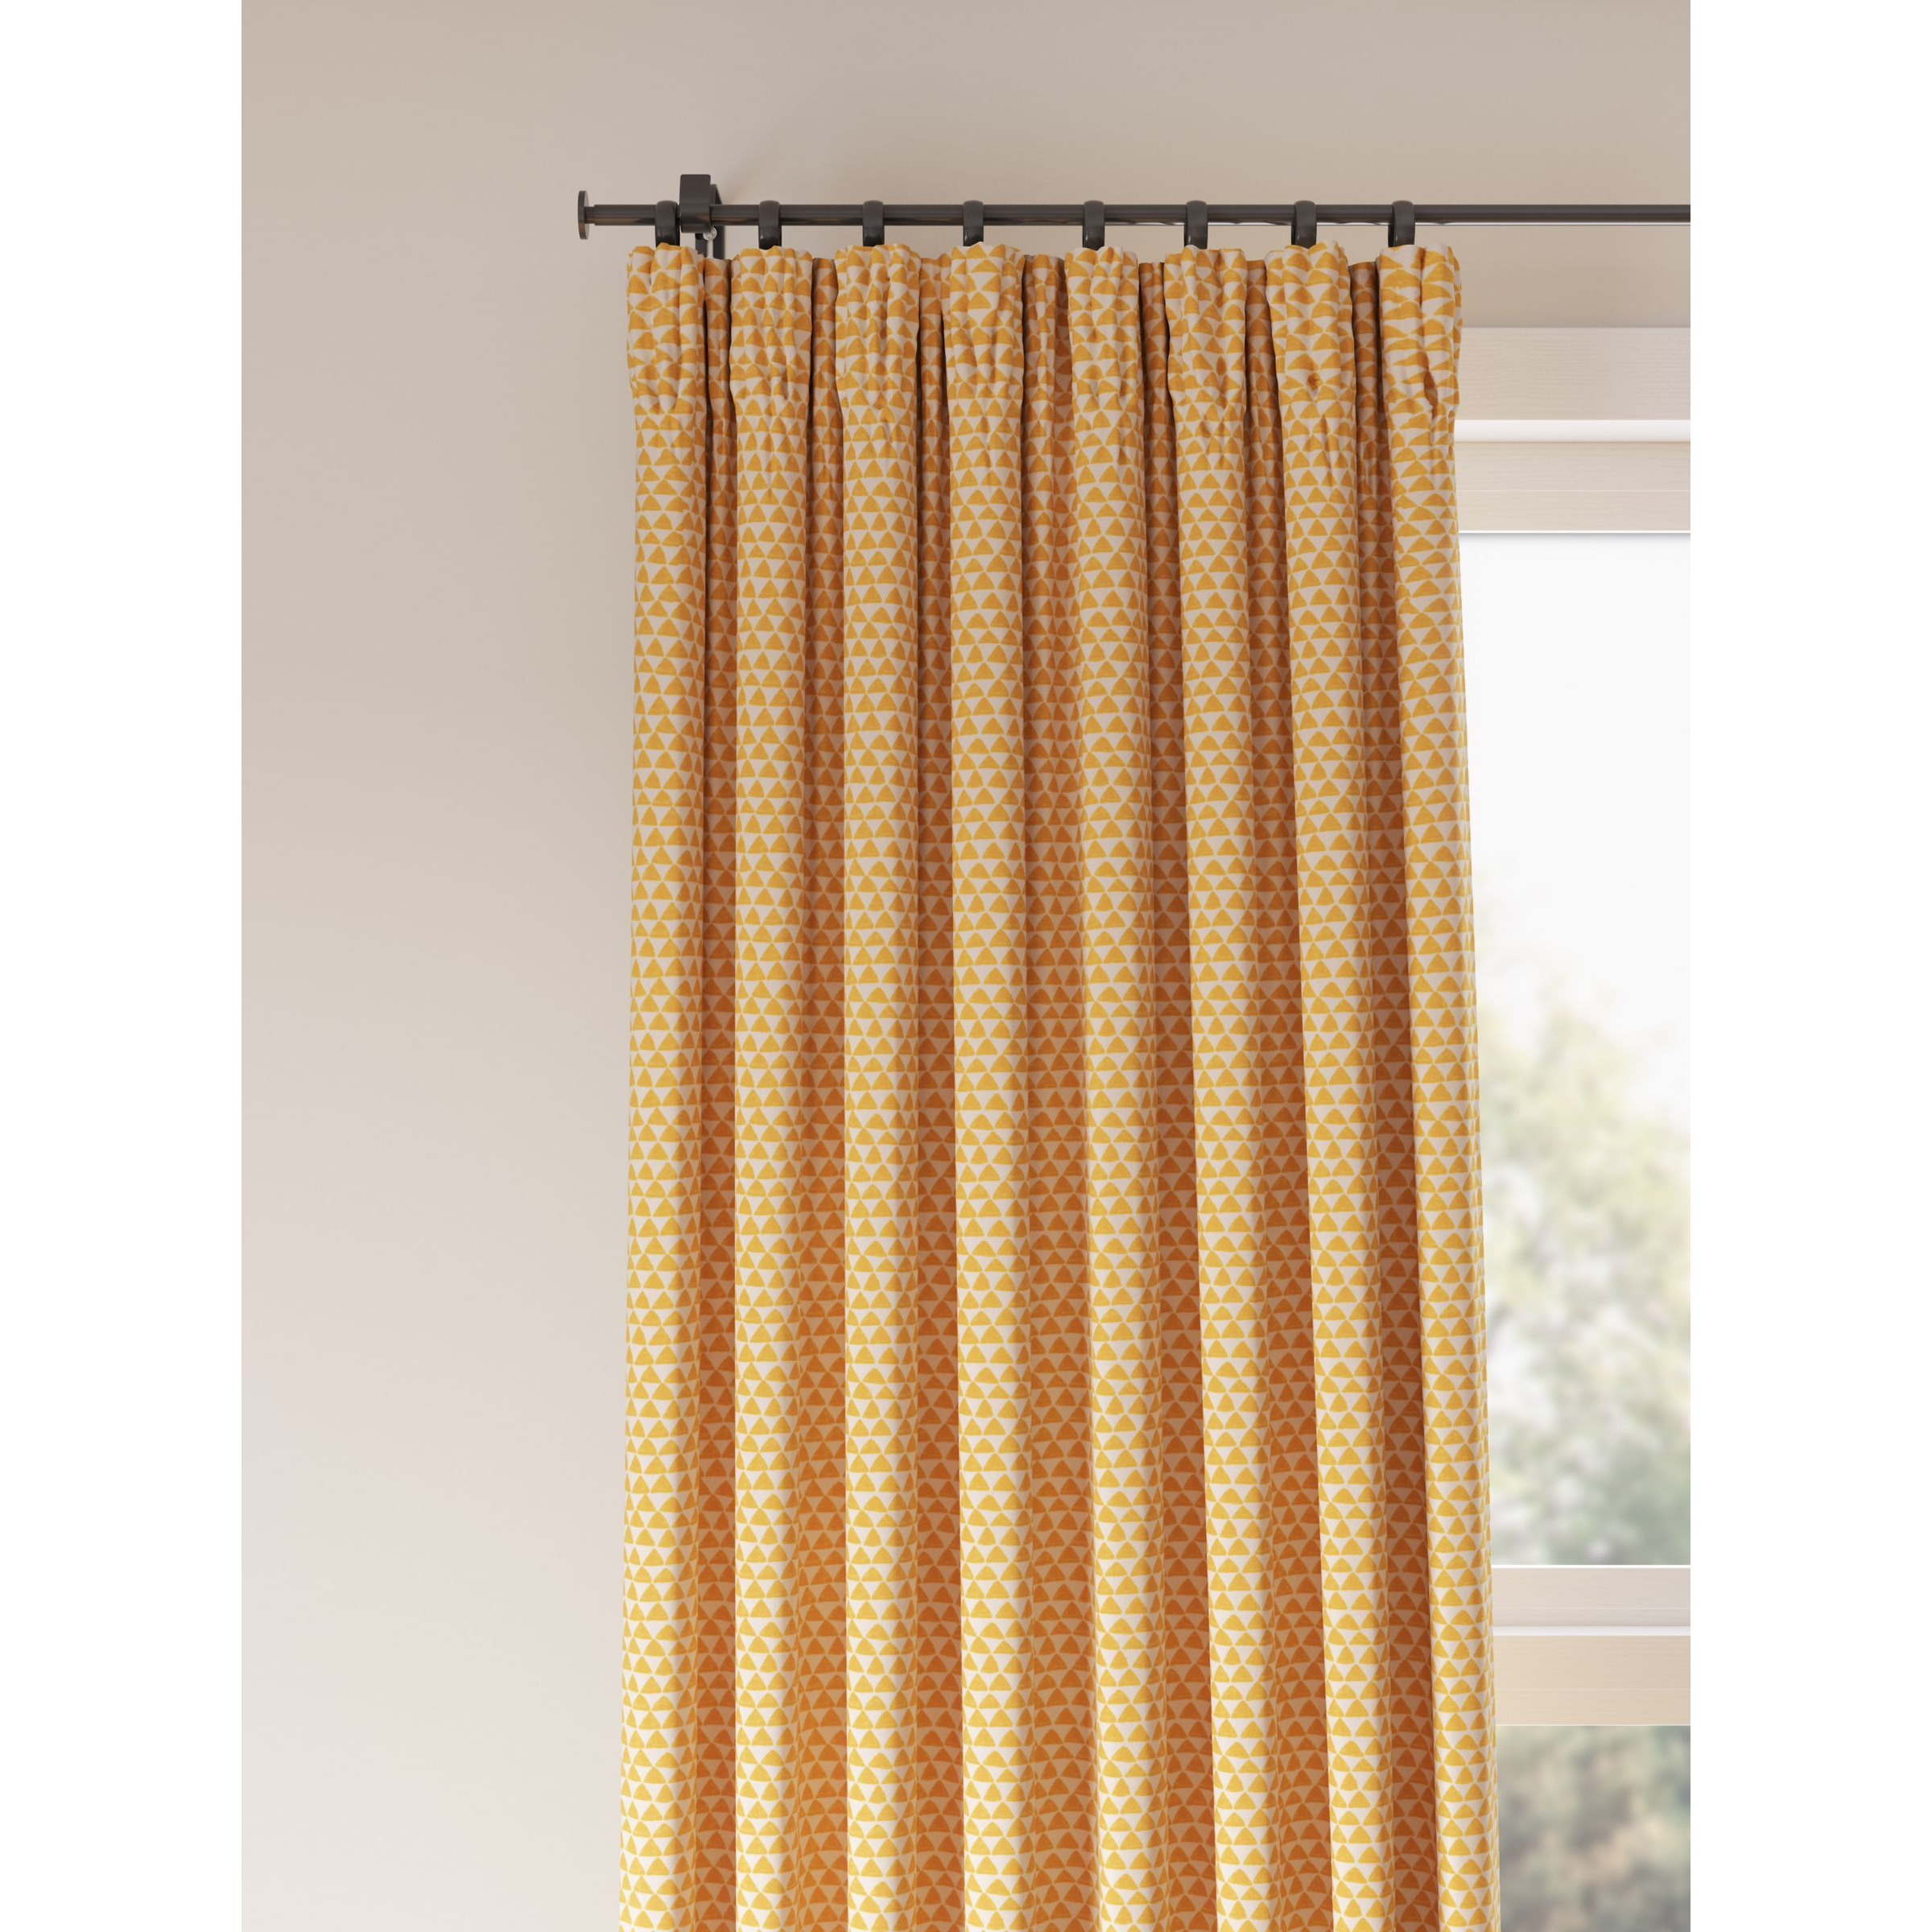 John Lewis ANYDAY Pyramid Print Pair Dimout/Thermal Lined Pencil Pleat Curtains, Mustard - image 1